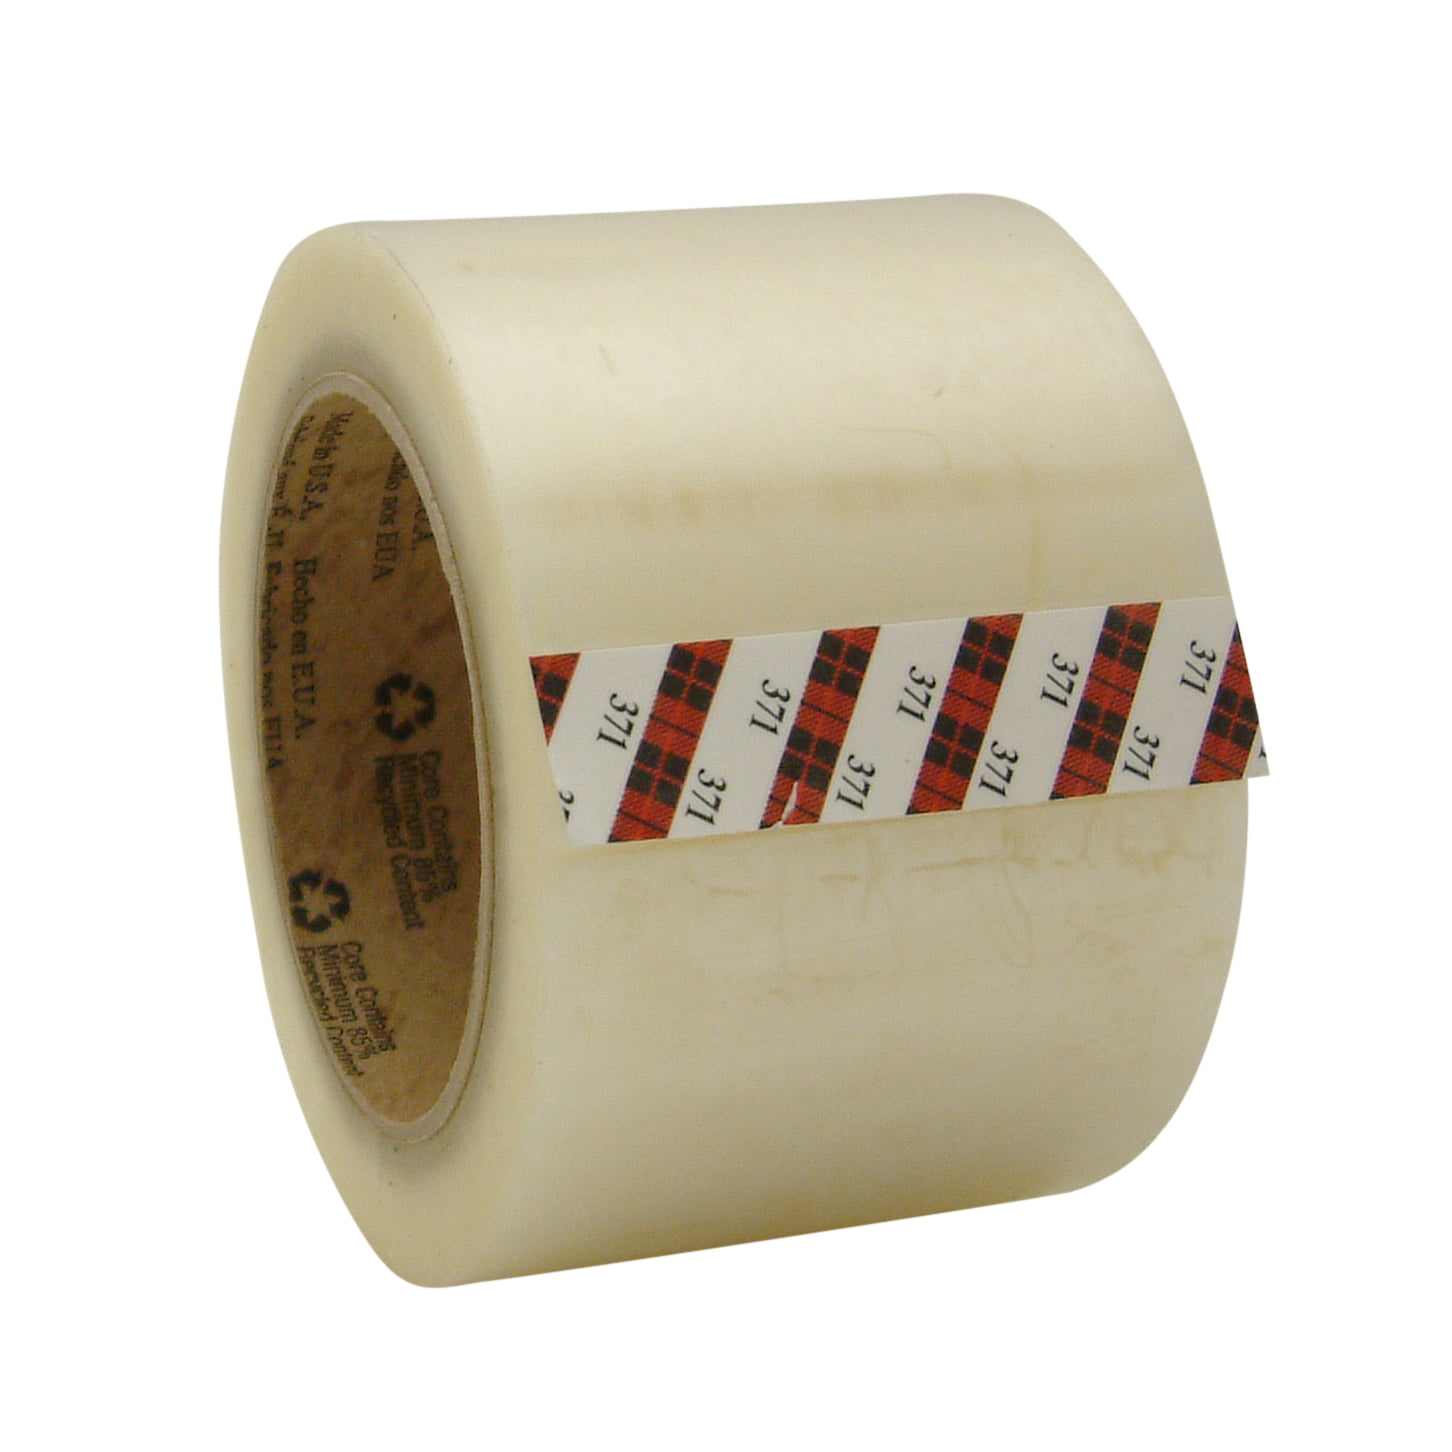 24 Rolls of 3M Scotch 371 CLEAR Packing 1" Tape 25mm x 66m 